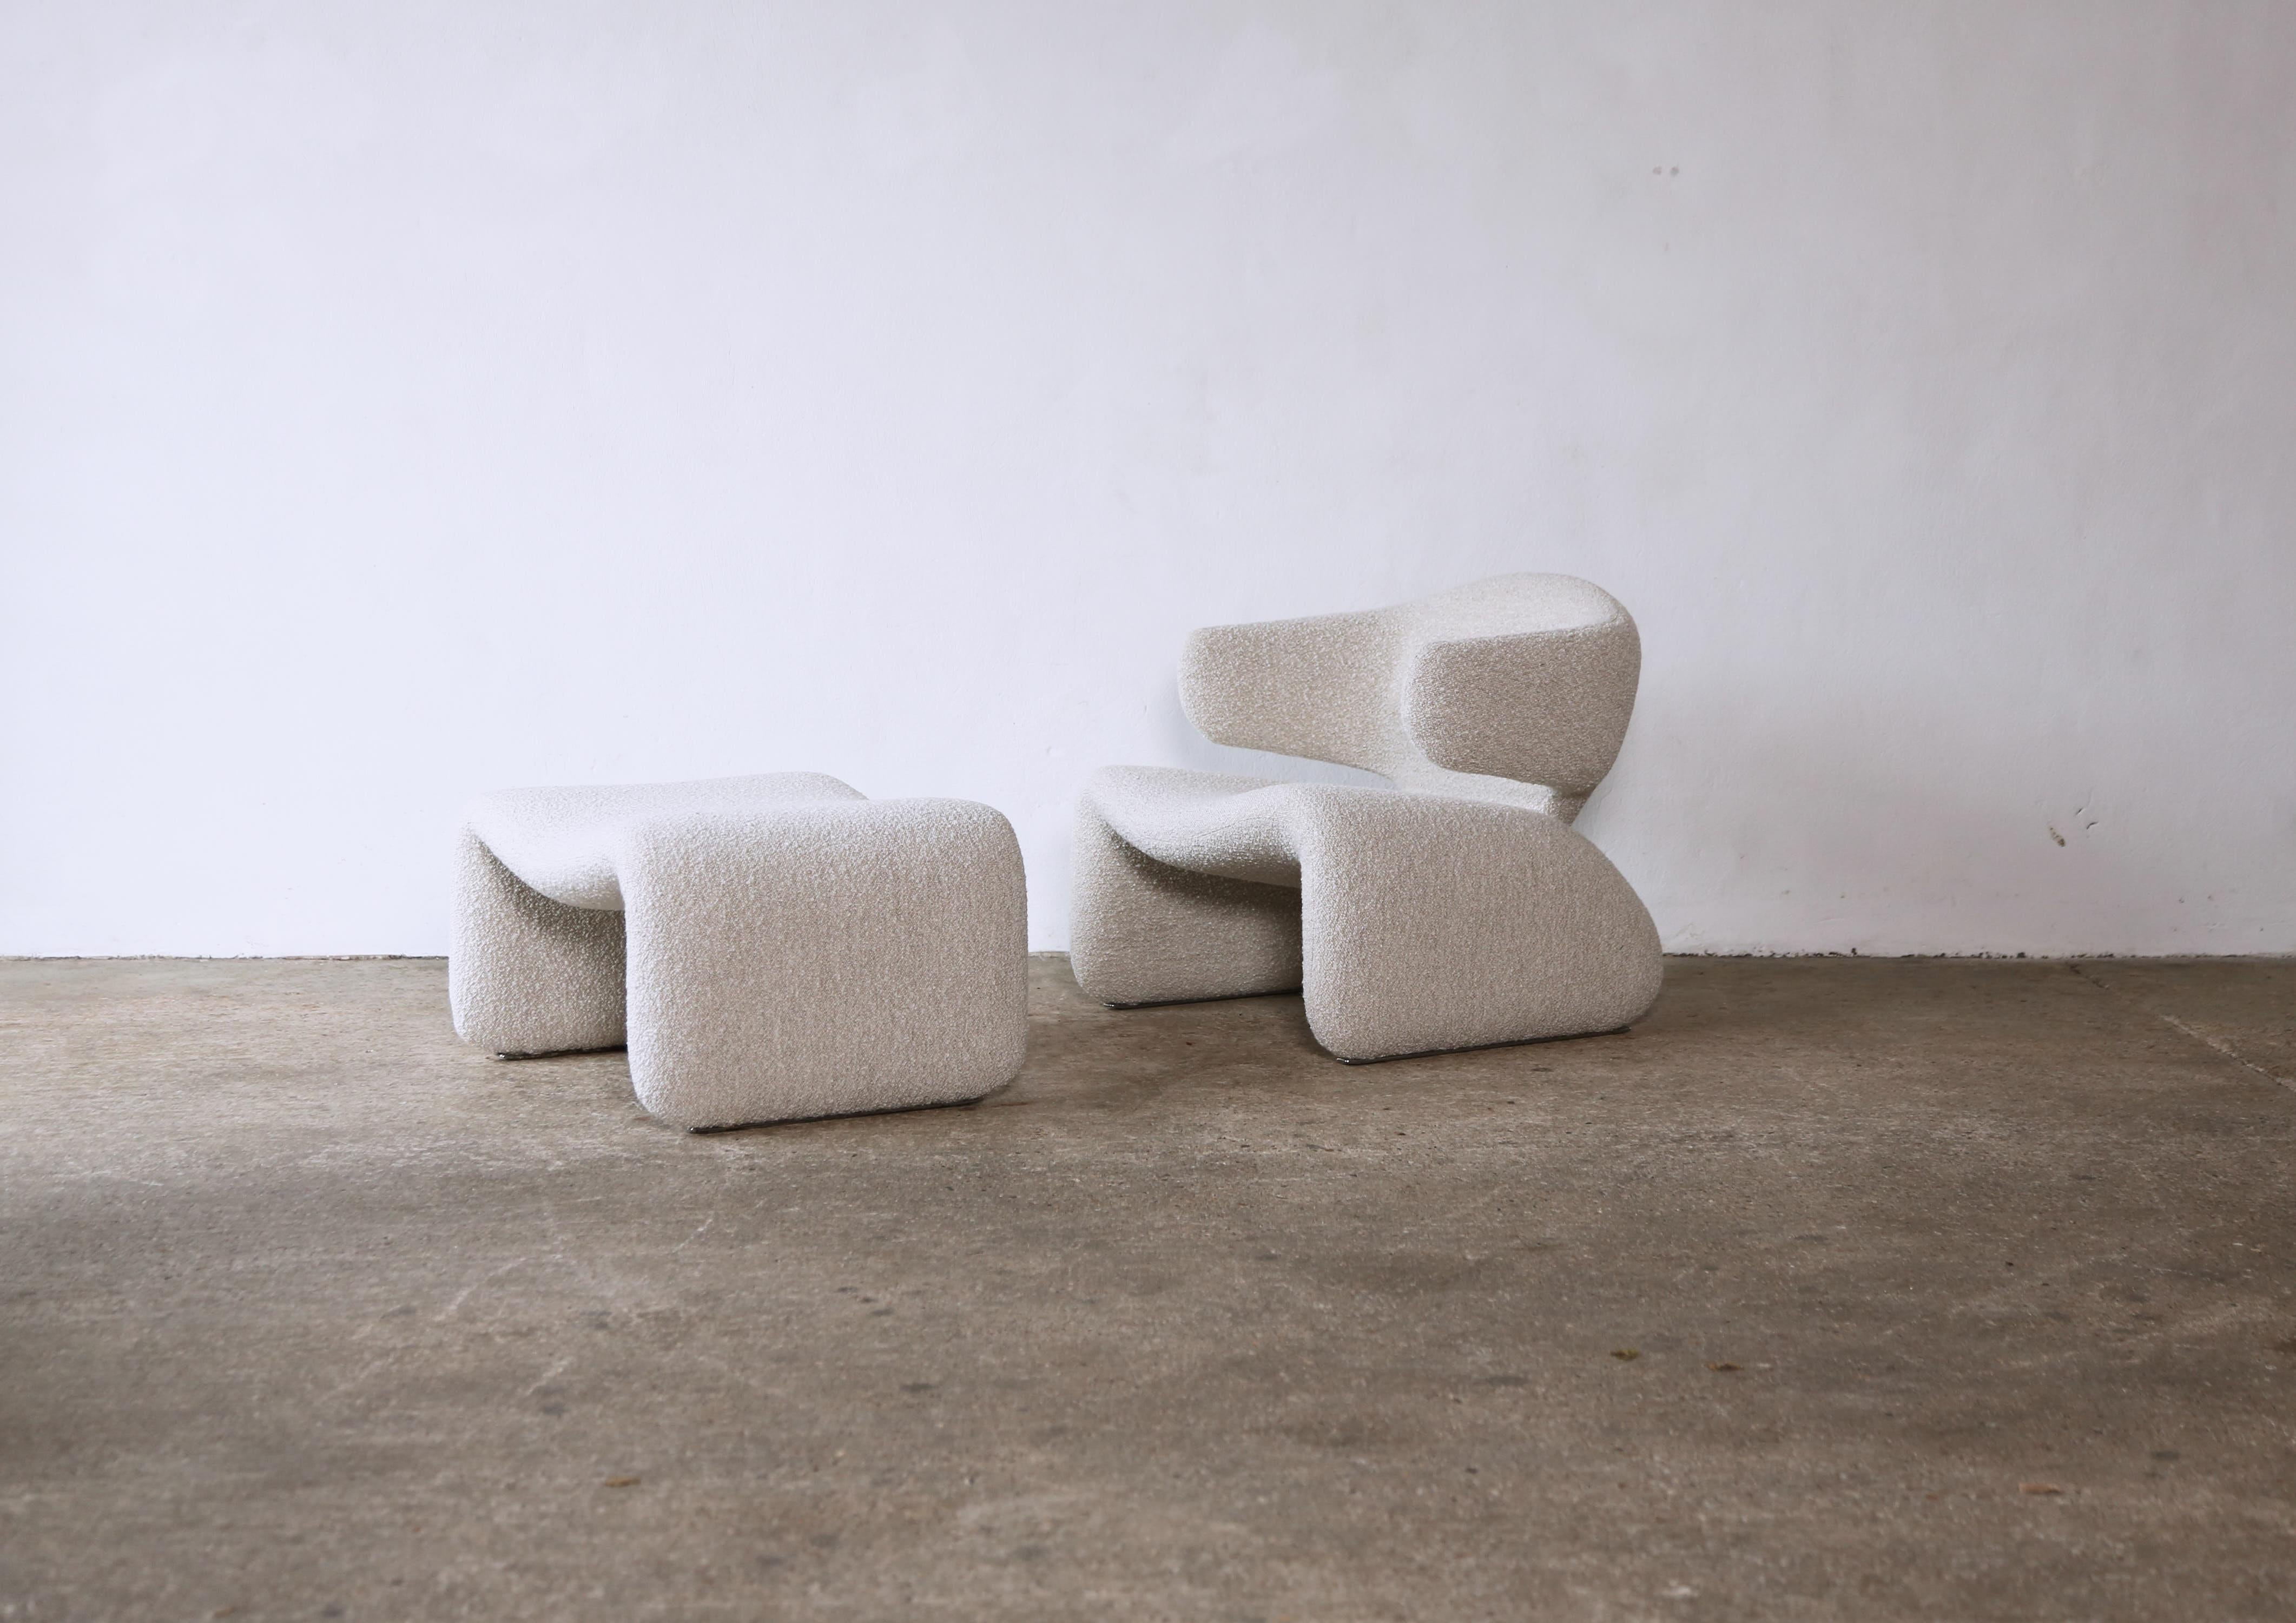 Rare original Djinn chair and ottoman by Olivier Mourgue, France, manufactured by Airborne International, circa 1965. Early edition newly upholstered in high quality wool Lelievre Lama Naturel boucle. A superb piece, ready to use. This model was